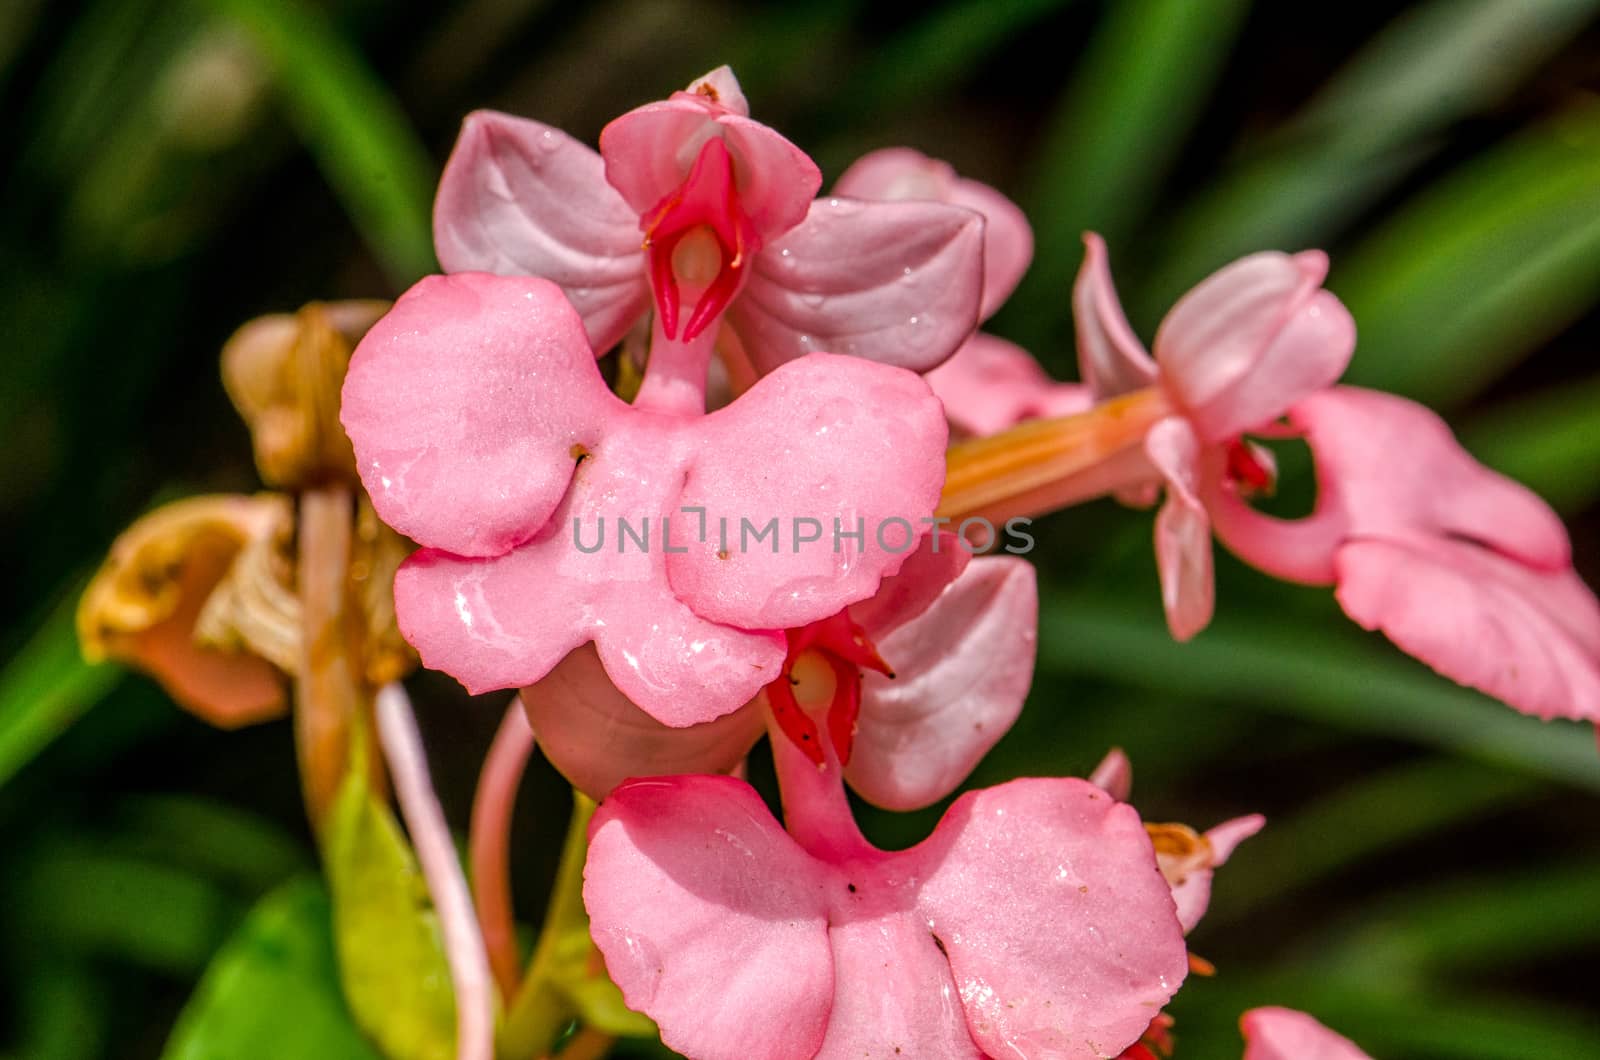 The Pink-Lipped Rhodocheila Habenaria (Pink Snap Dragon Flower)  by chanwity